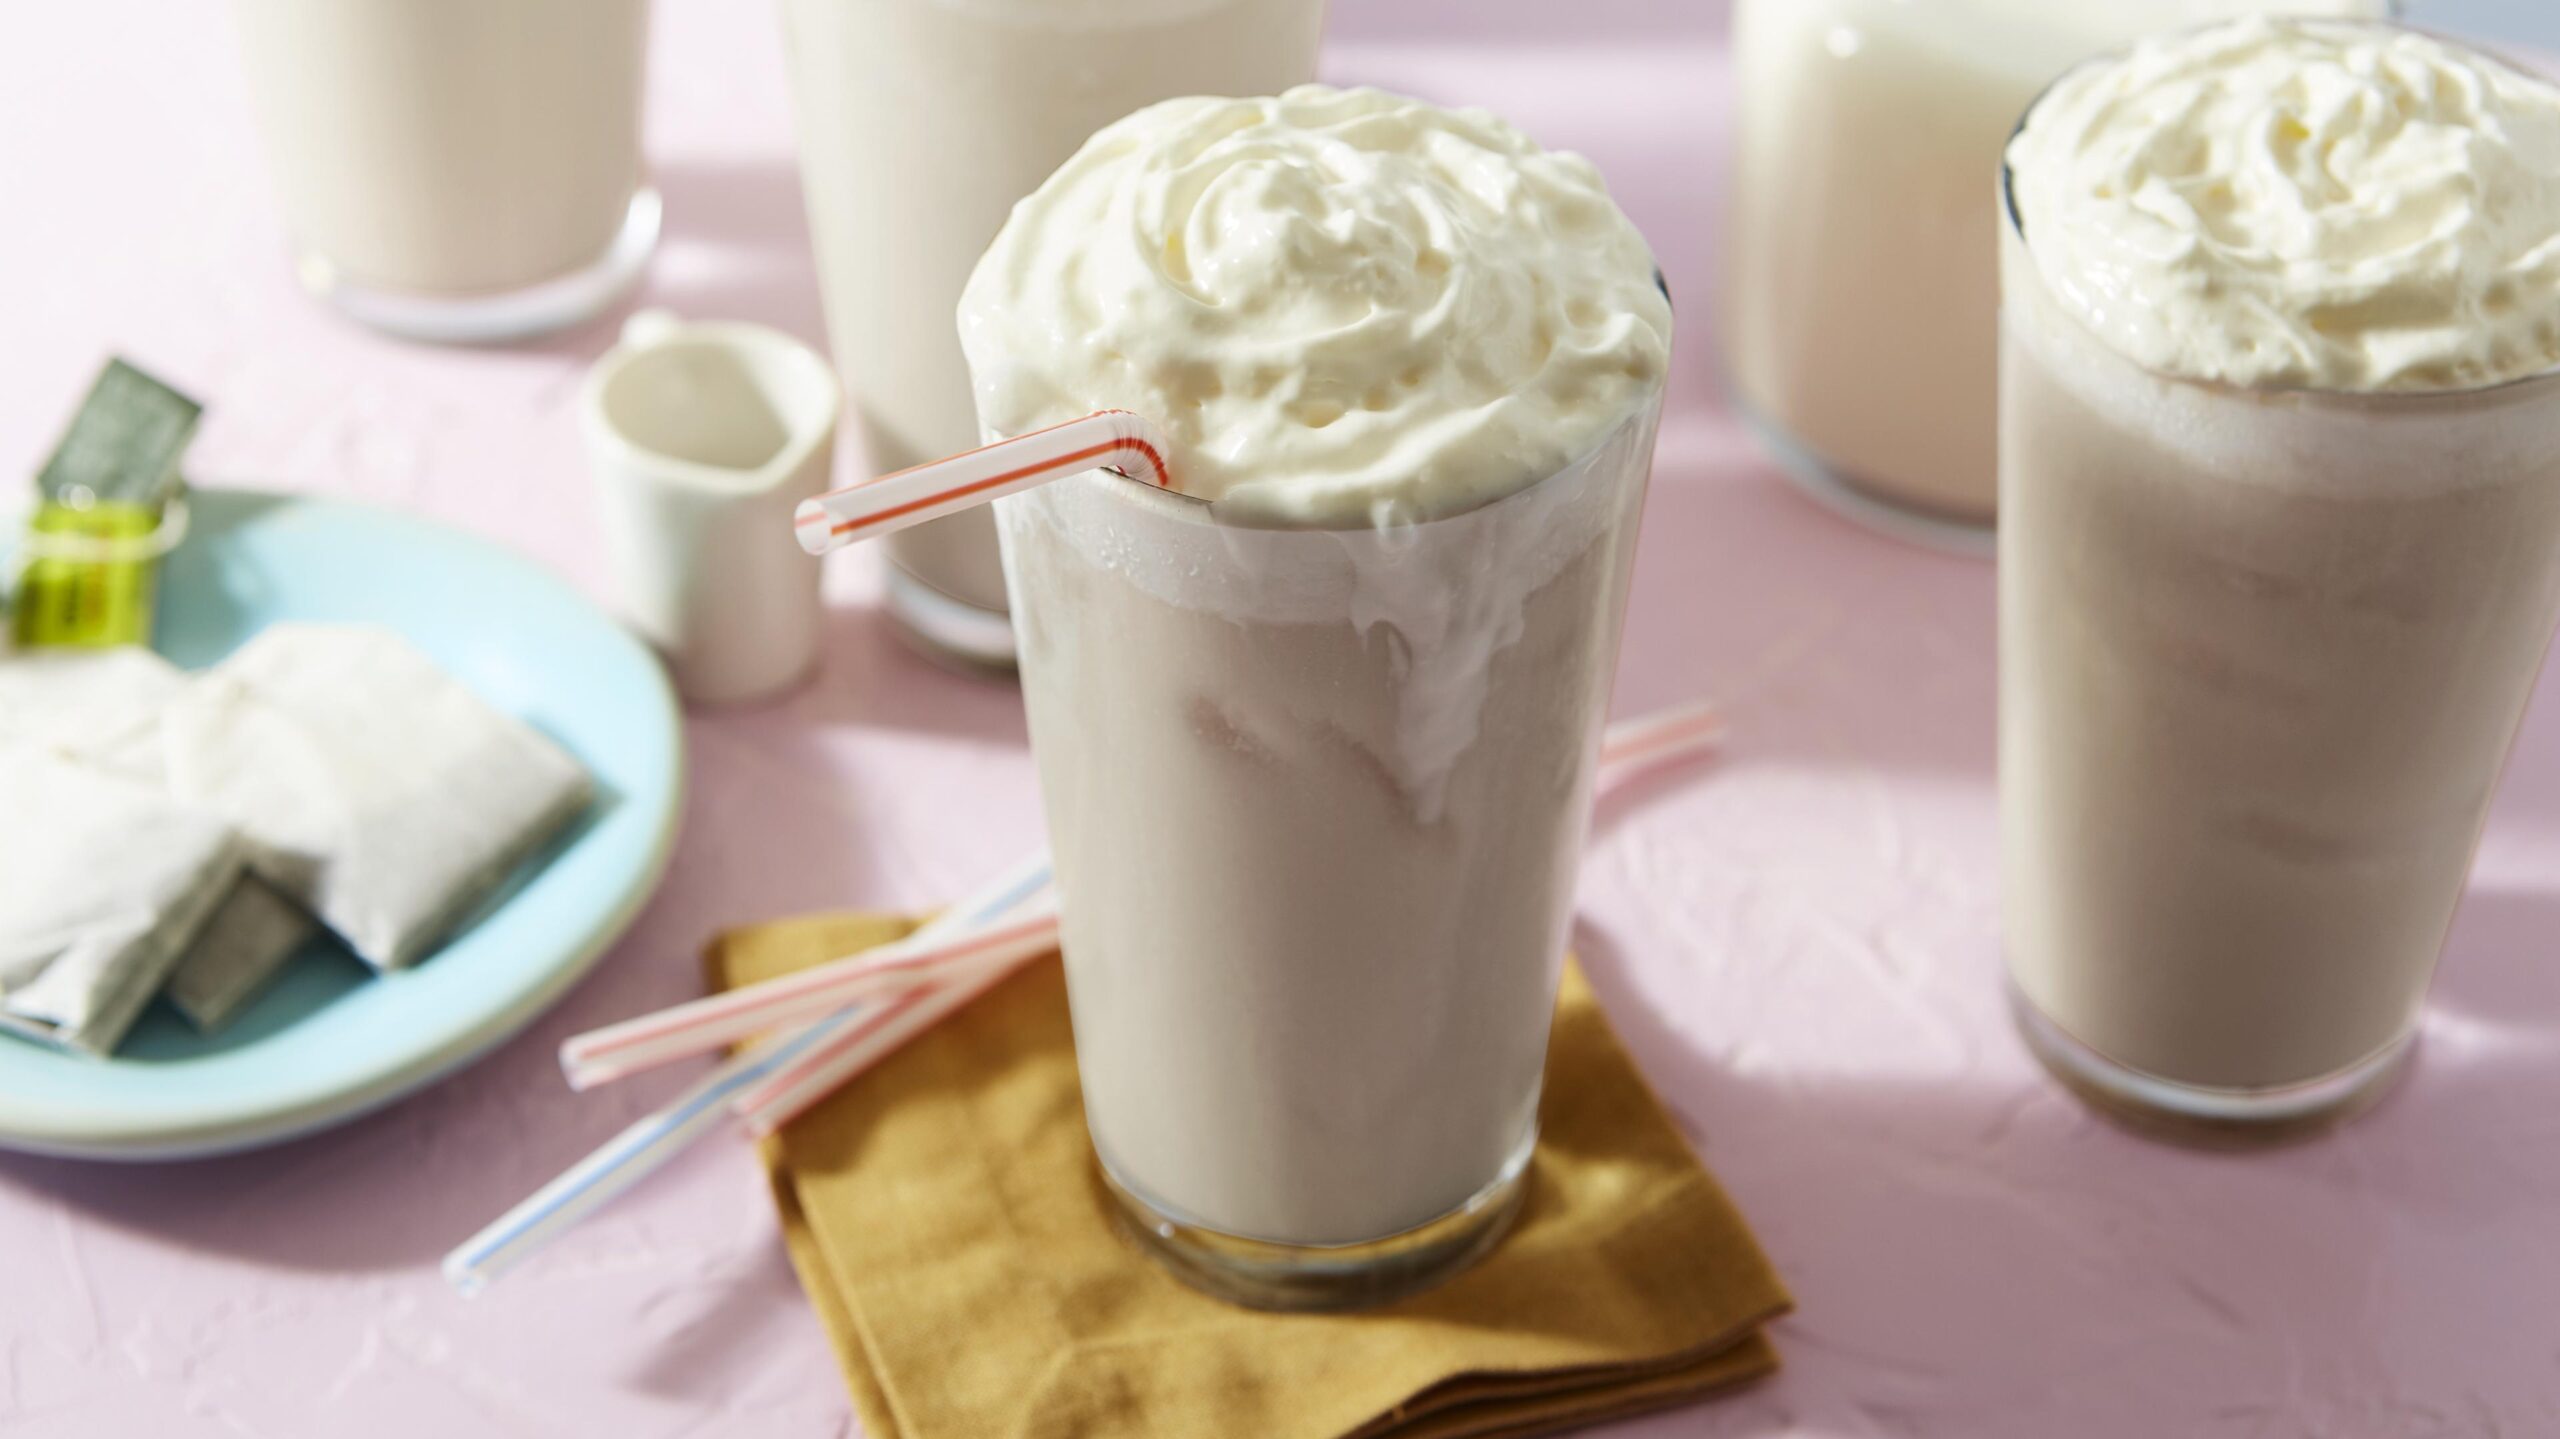  A refreshing cold drink with the perfect balance of sweet and creamy flavors.